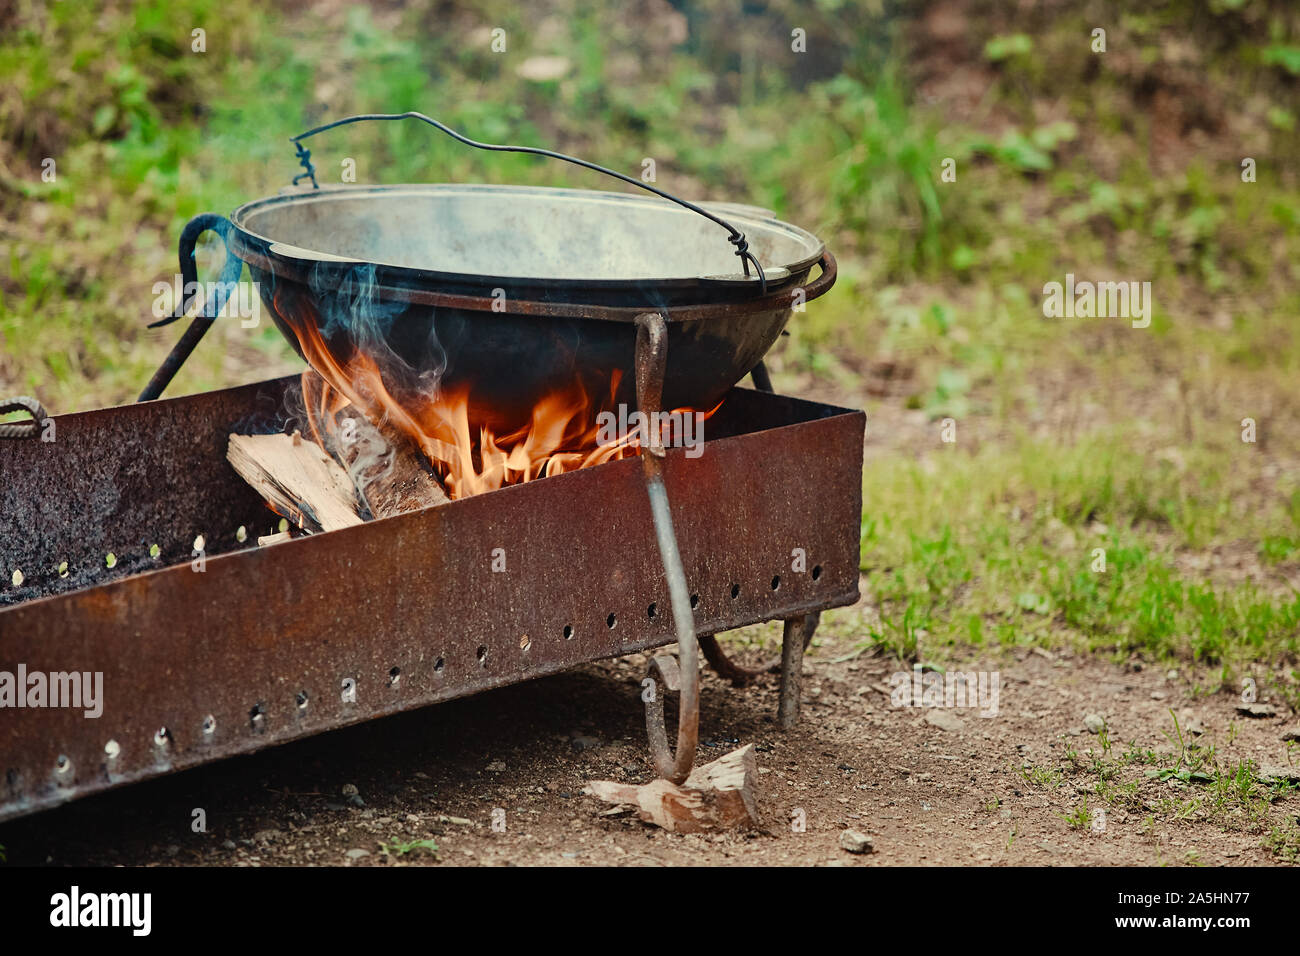 A metal boiler stands on a grill with fire and firewood, in a tourist  Parking lot Stock Photo - Alamy